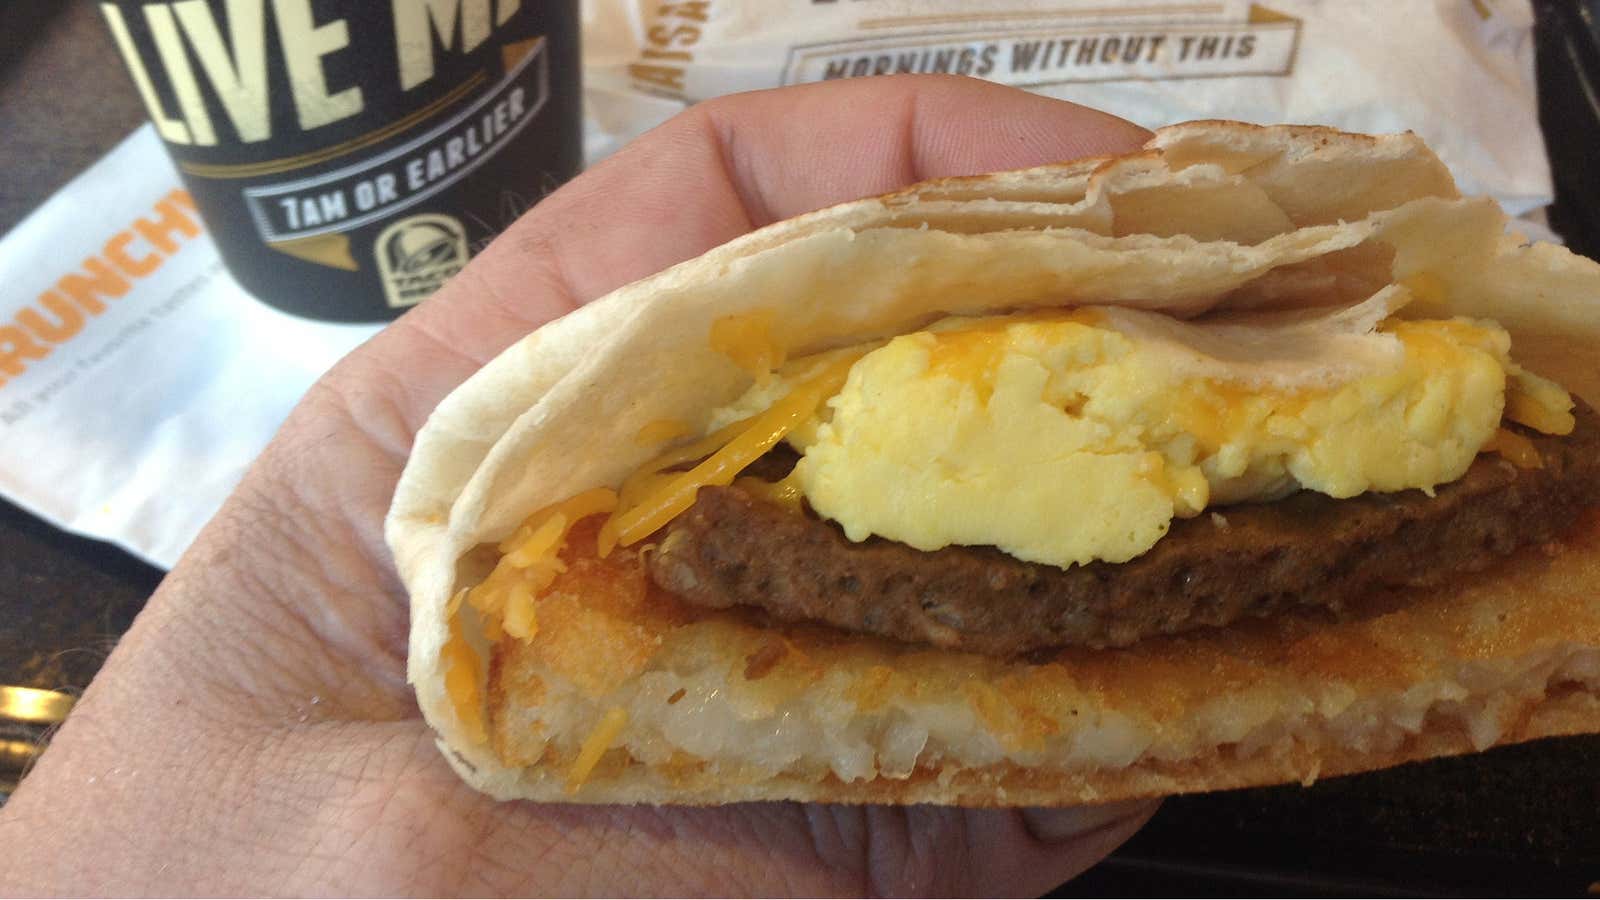 Coming soon to a Taco Bell near you: Artificial-ingredient-free breakfast burritos.